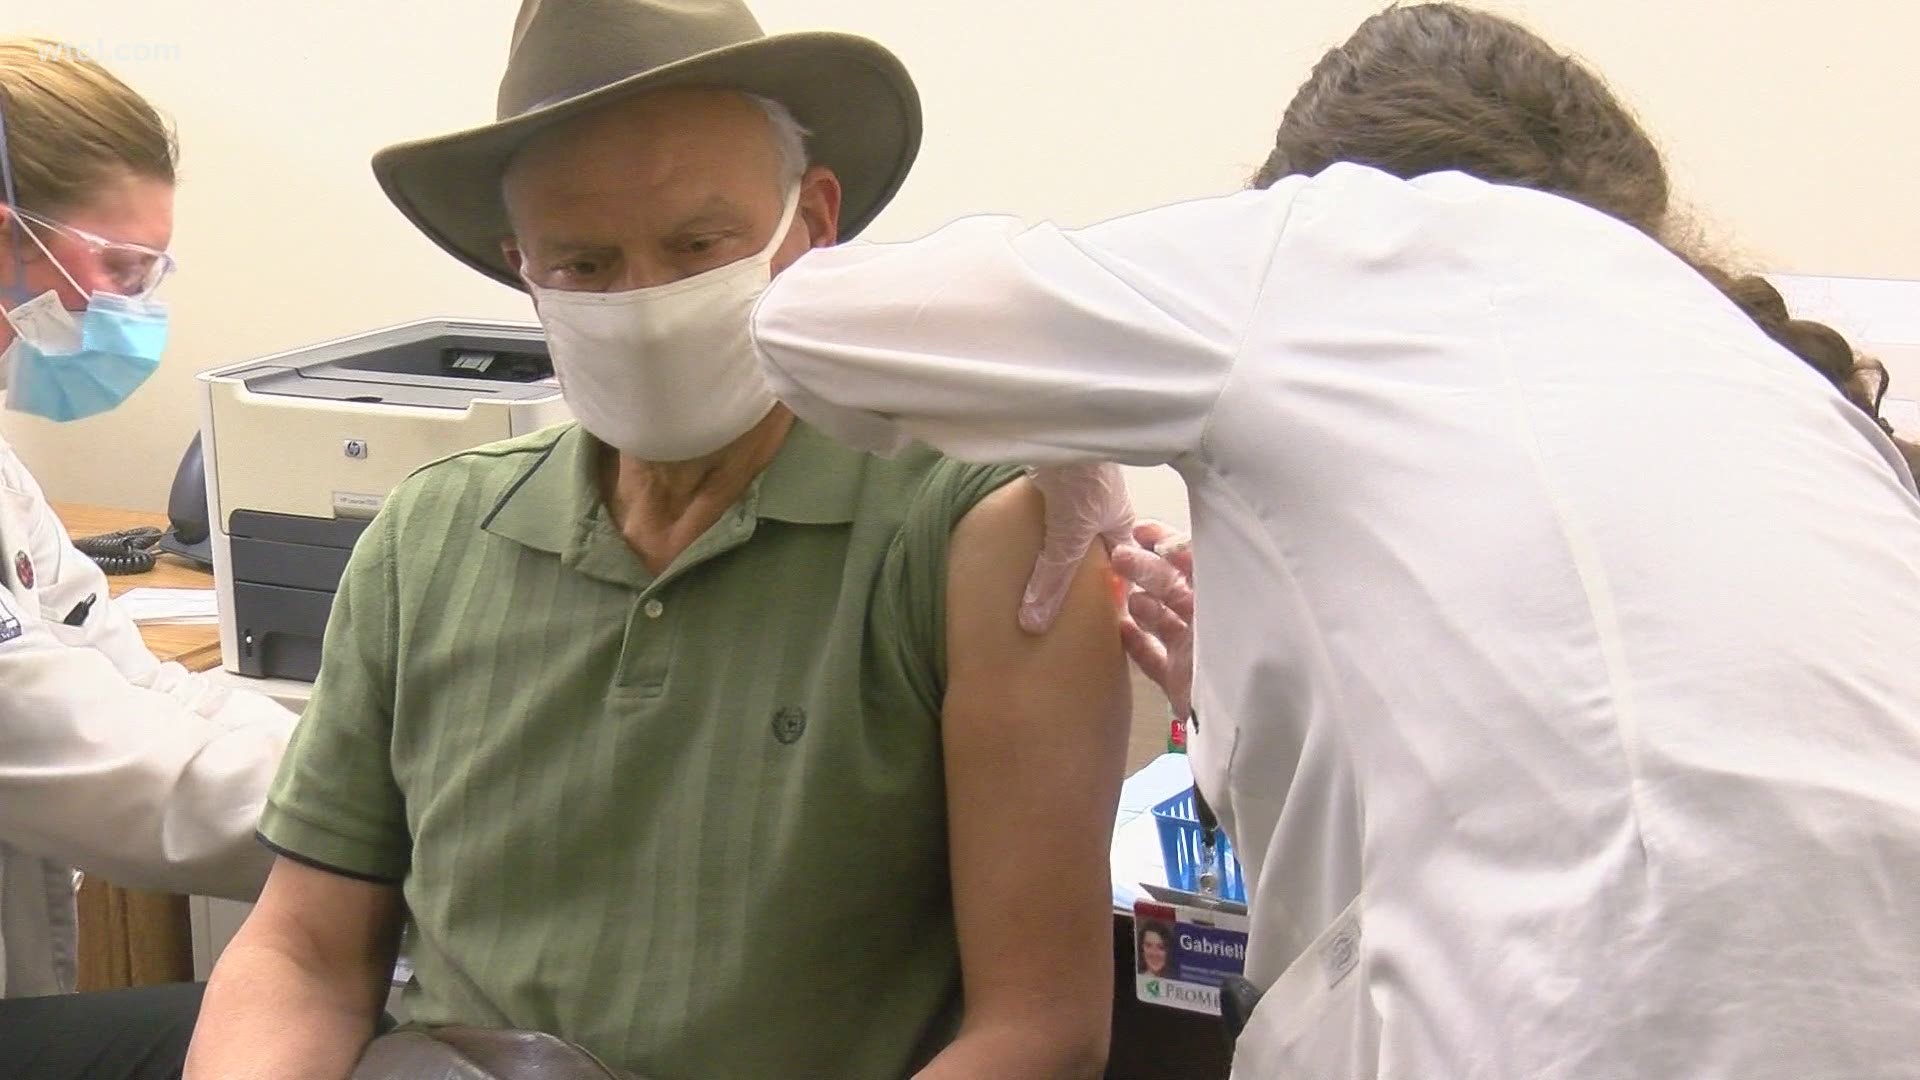 About 30 people were able to be vaccinated and the organizations is holding another COVID-19 vaccine clinic next Friday.